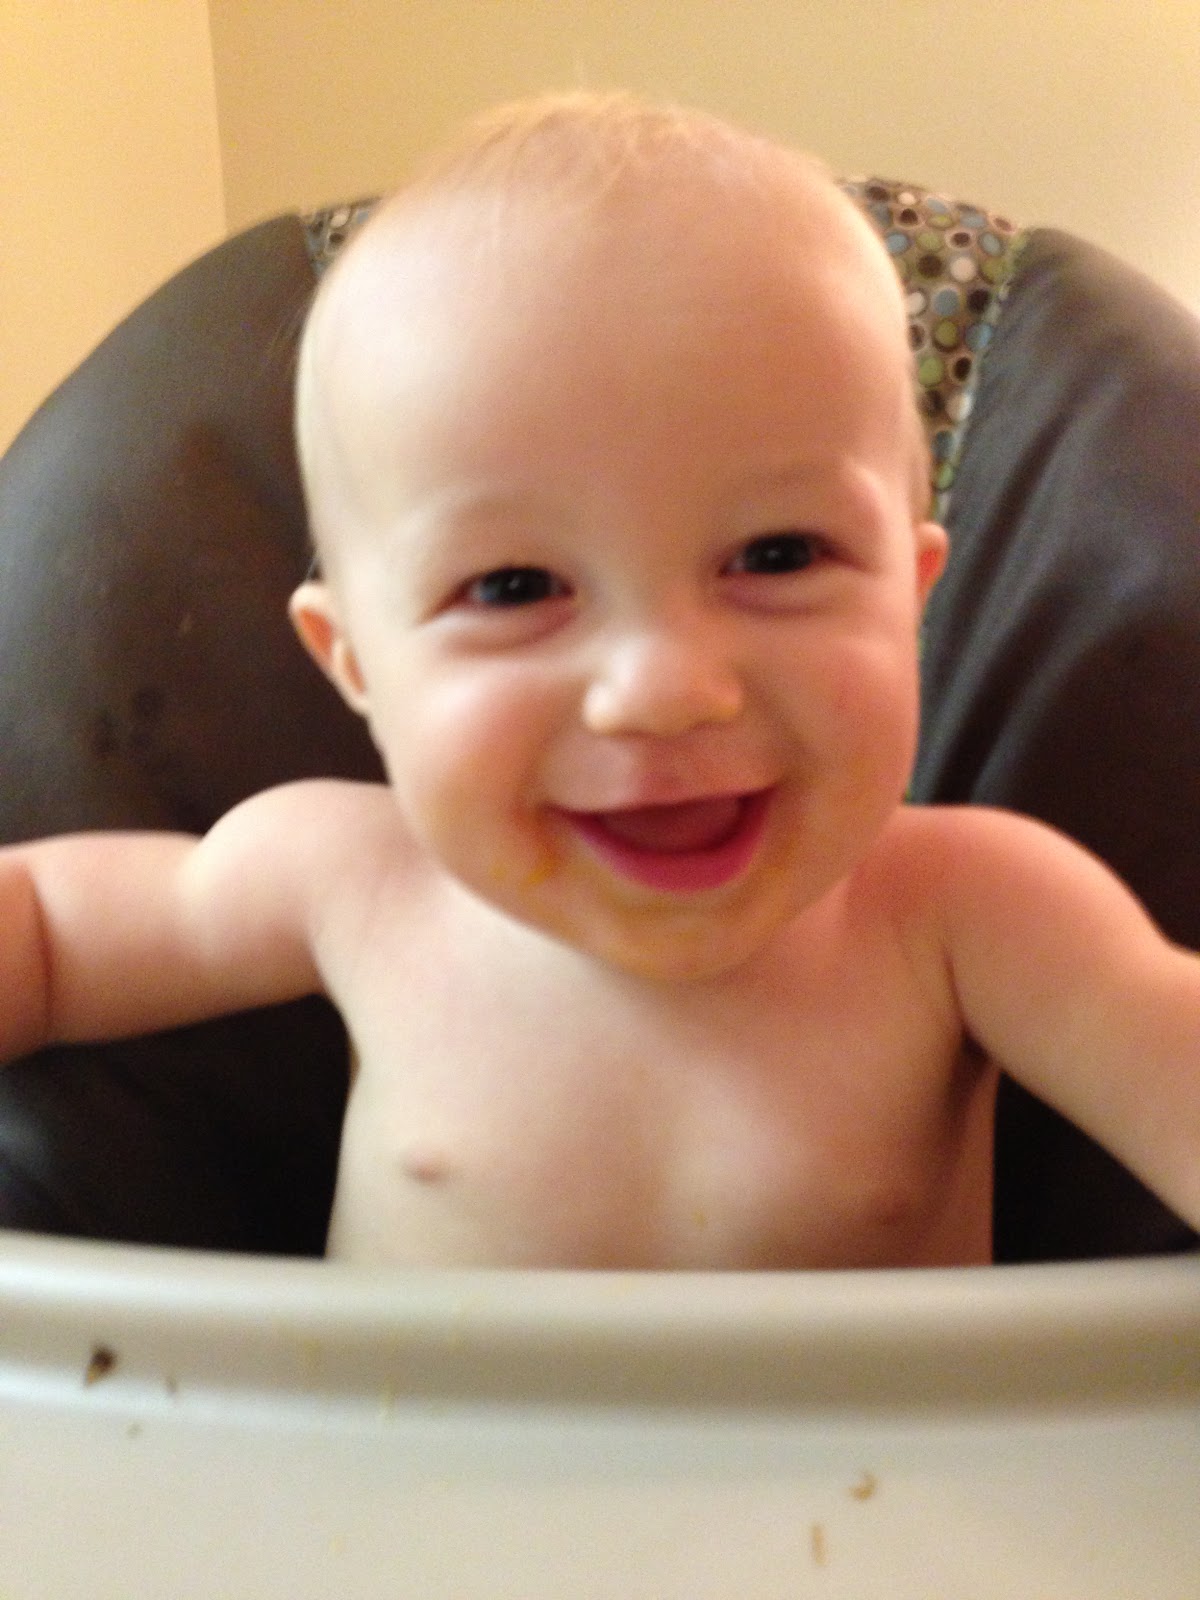 Shirtless baby in highchair